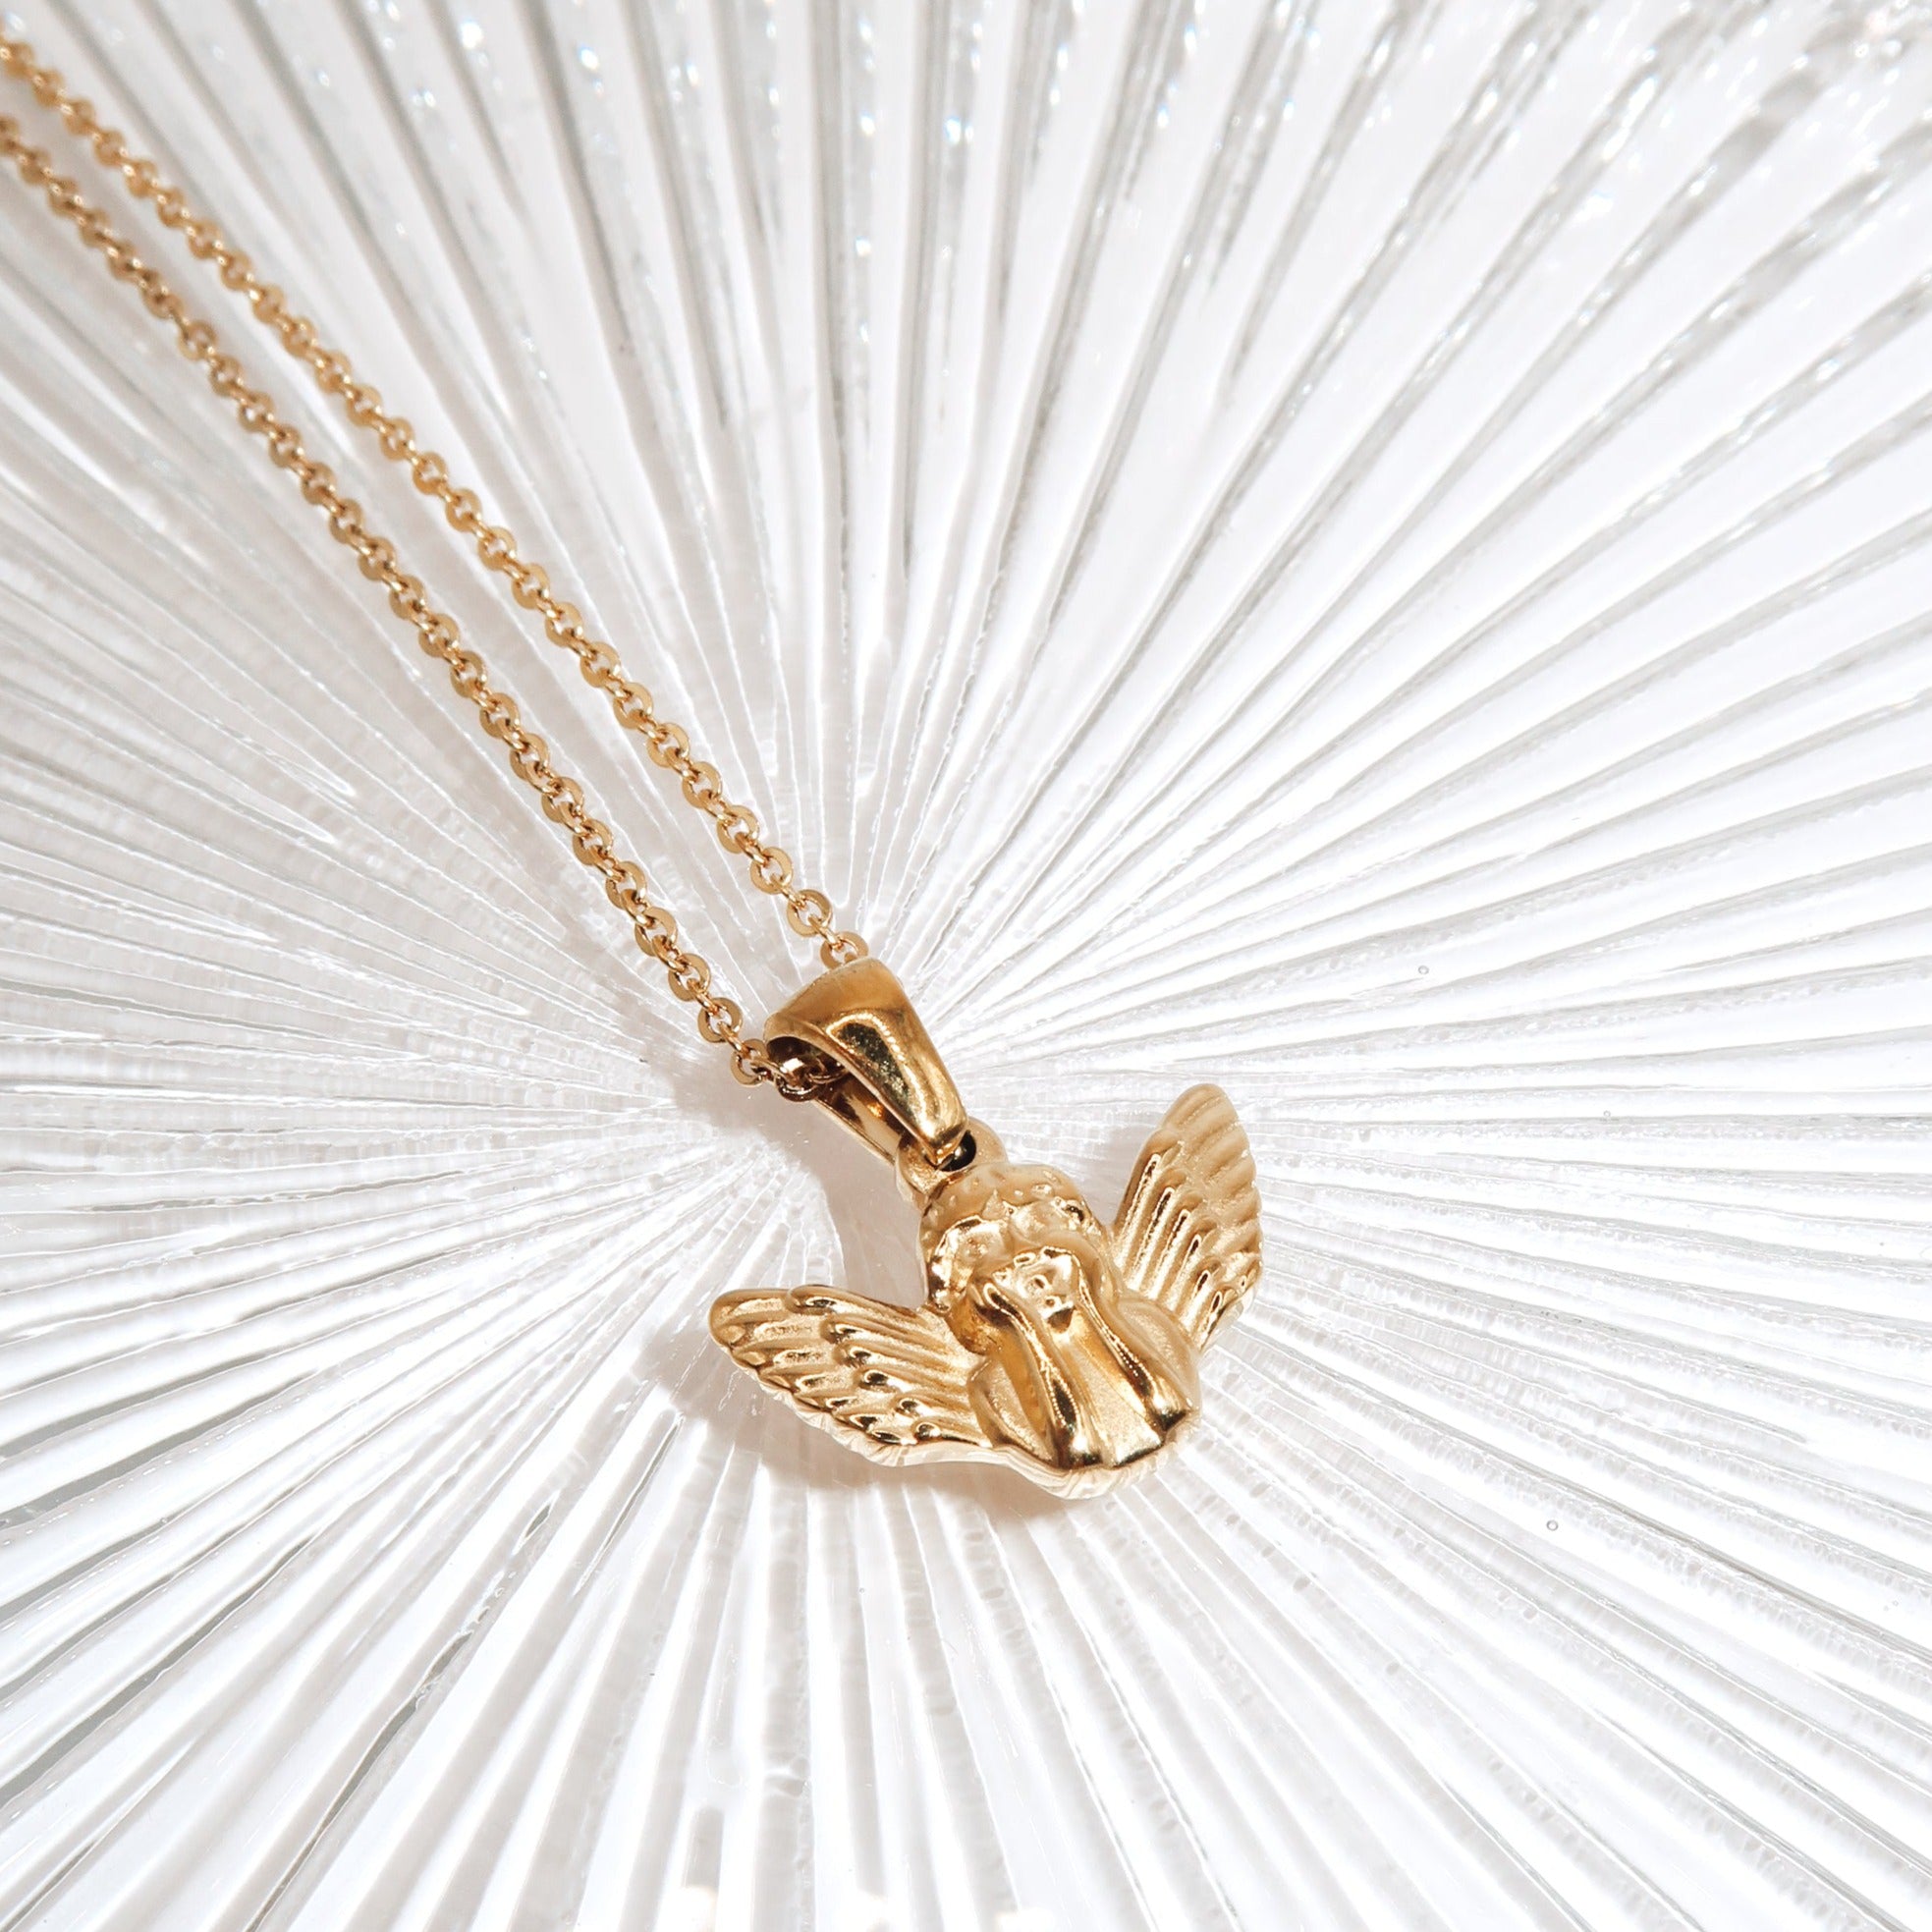 ADELINE - 18K PVD Gold Plated Angel Pendant Necklace - Mixed Metals